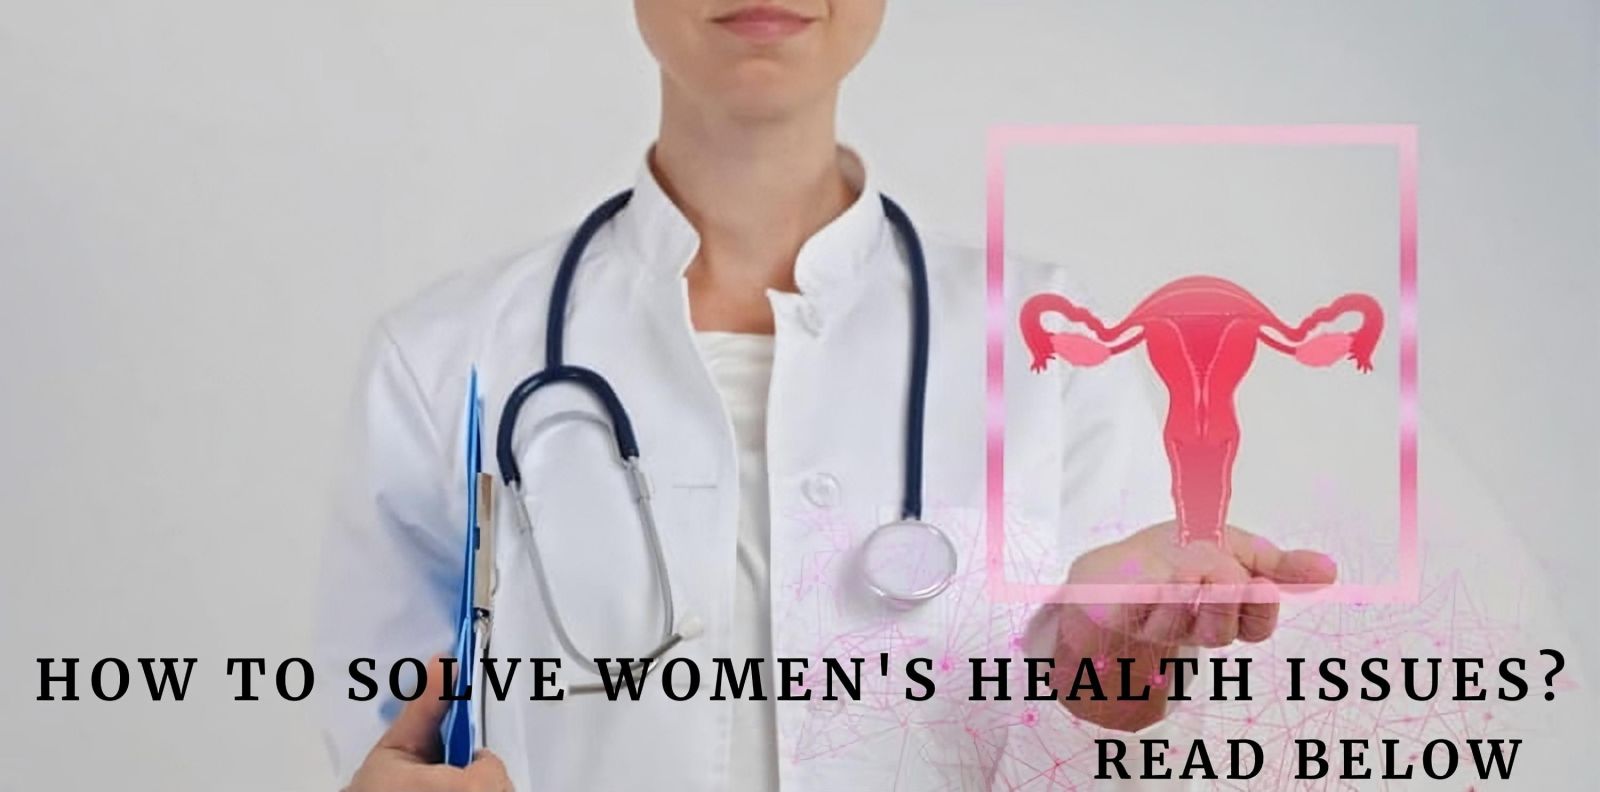 Women's health and the gynecologist